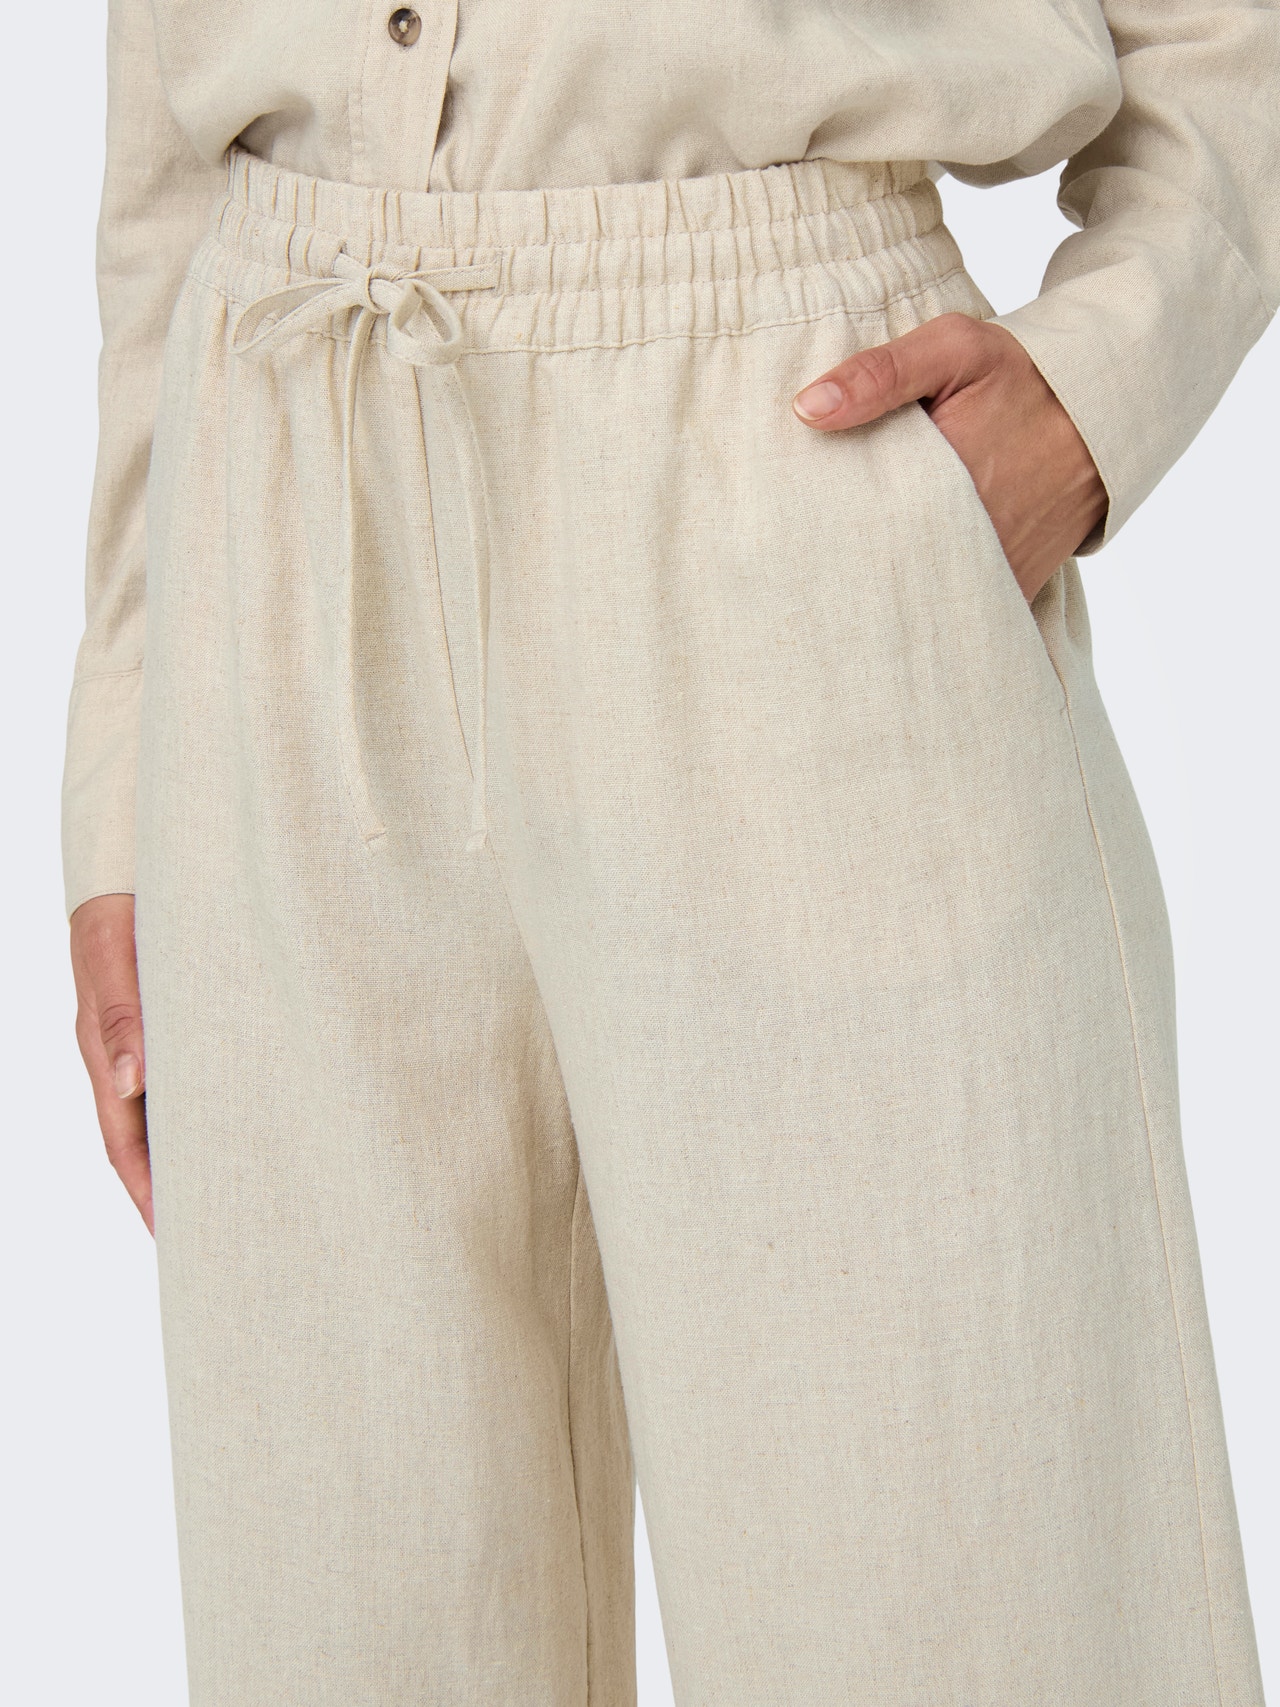 ONLY Loose Fit High waist Trousers -Oatmeal - 15318361